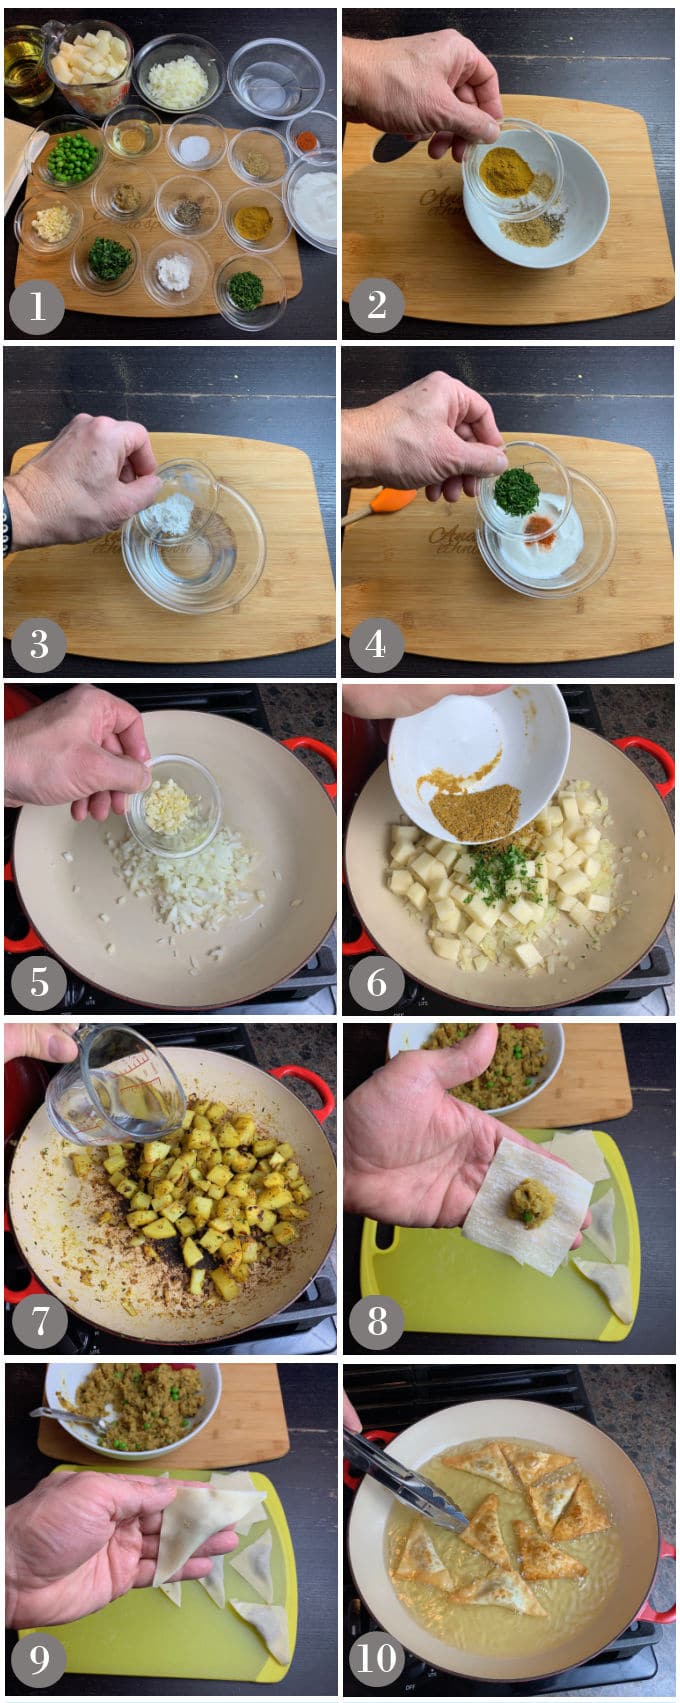 A collage of photos showing the steps to make vegetarian samosas with wonton wrappers.